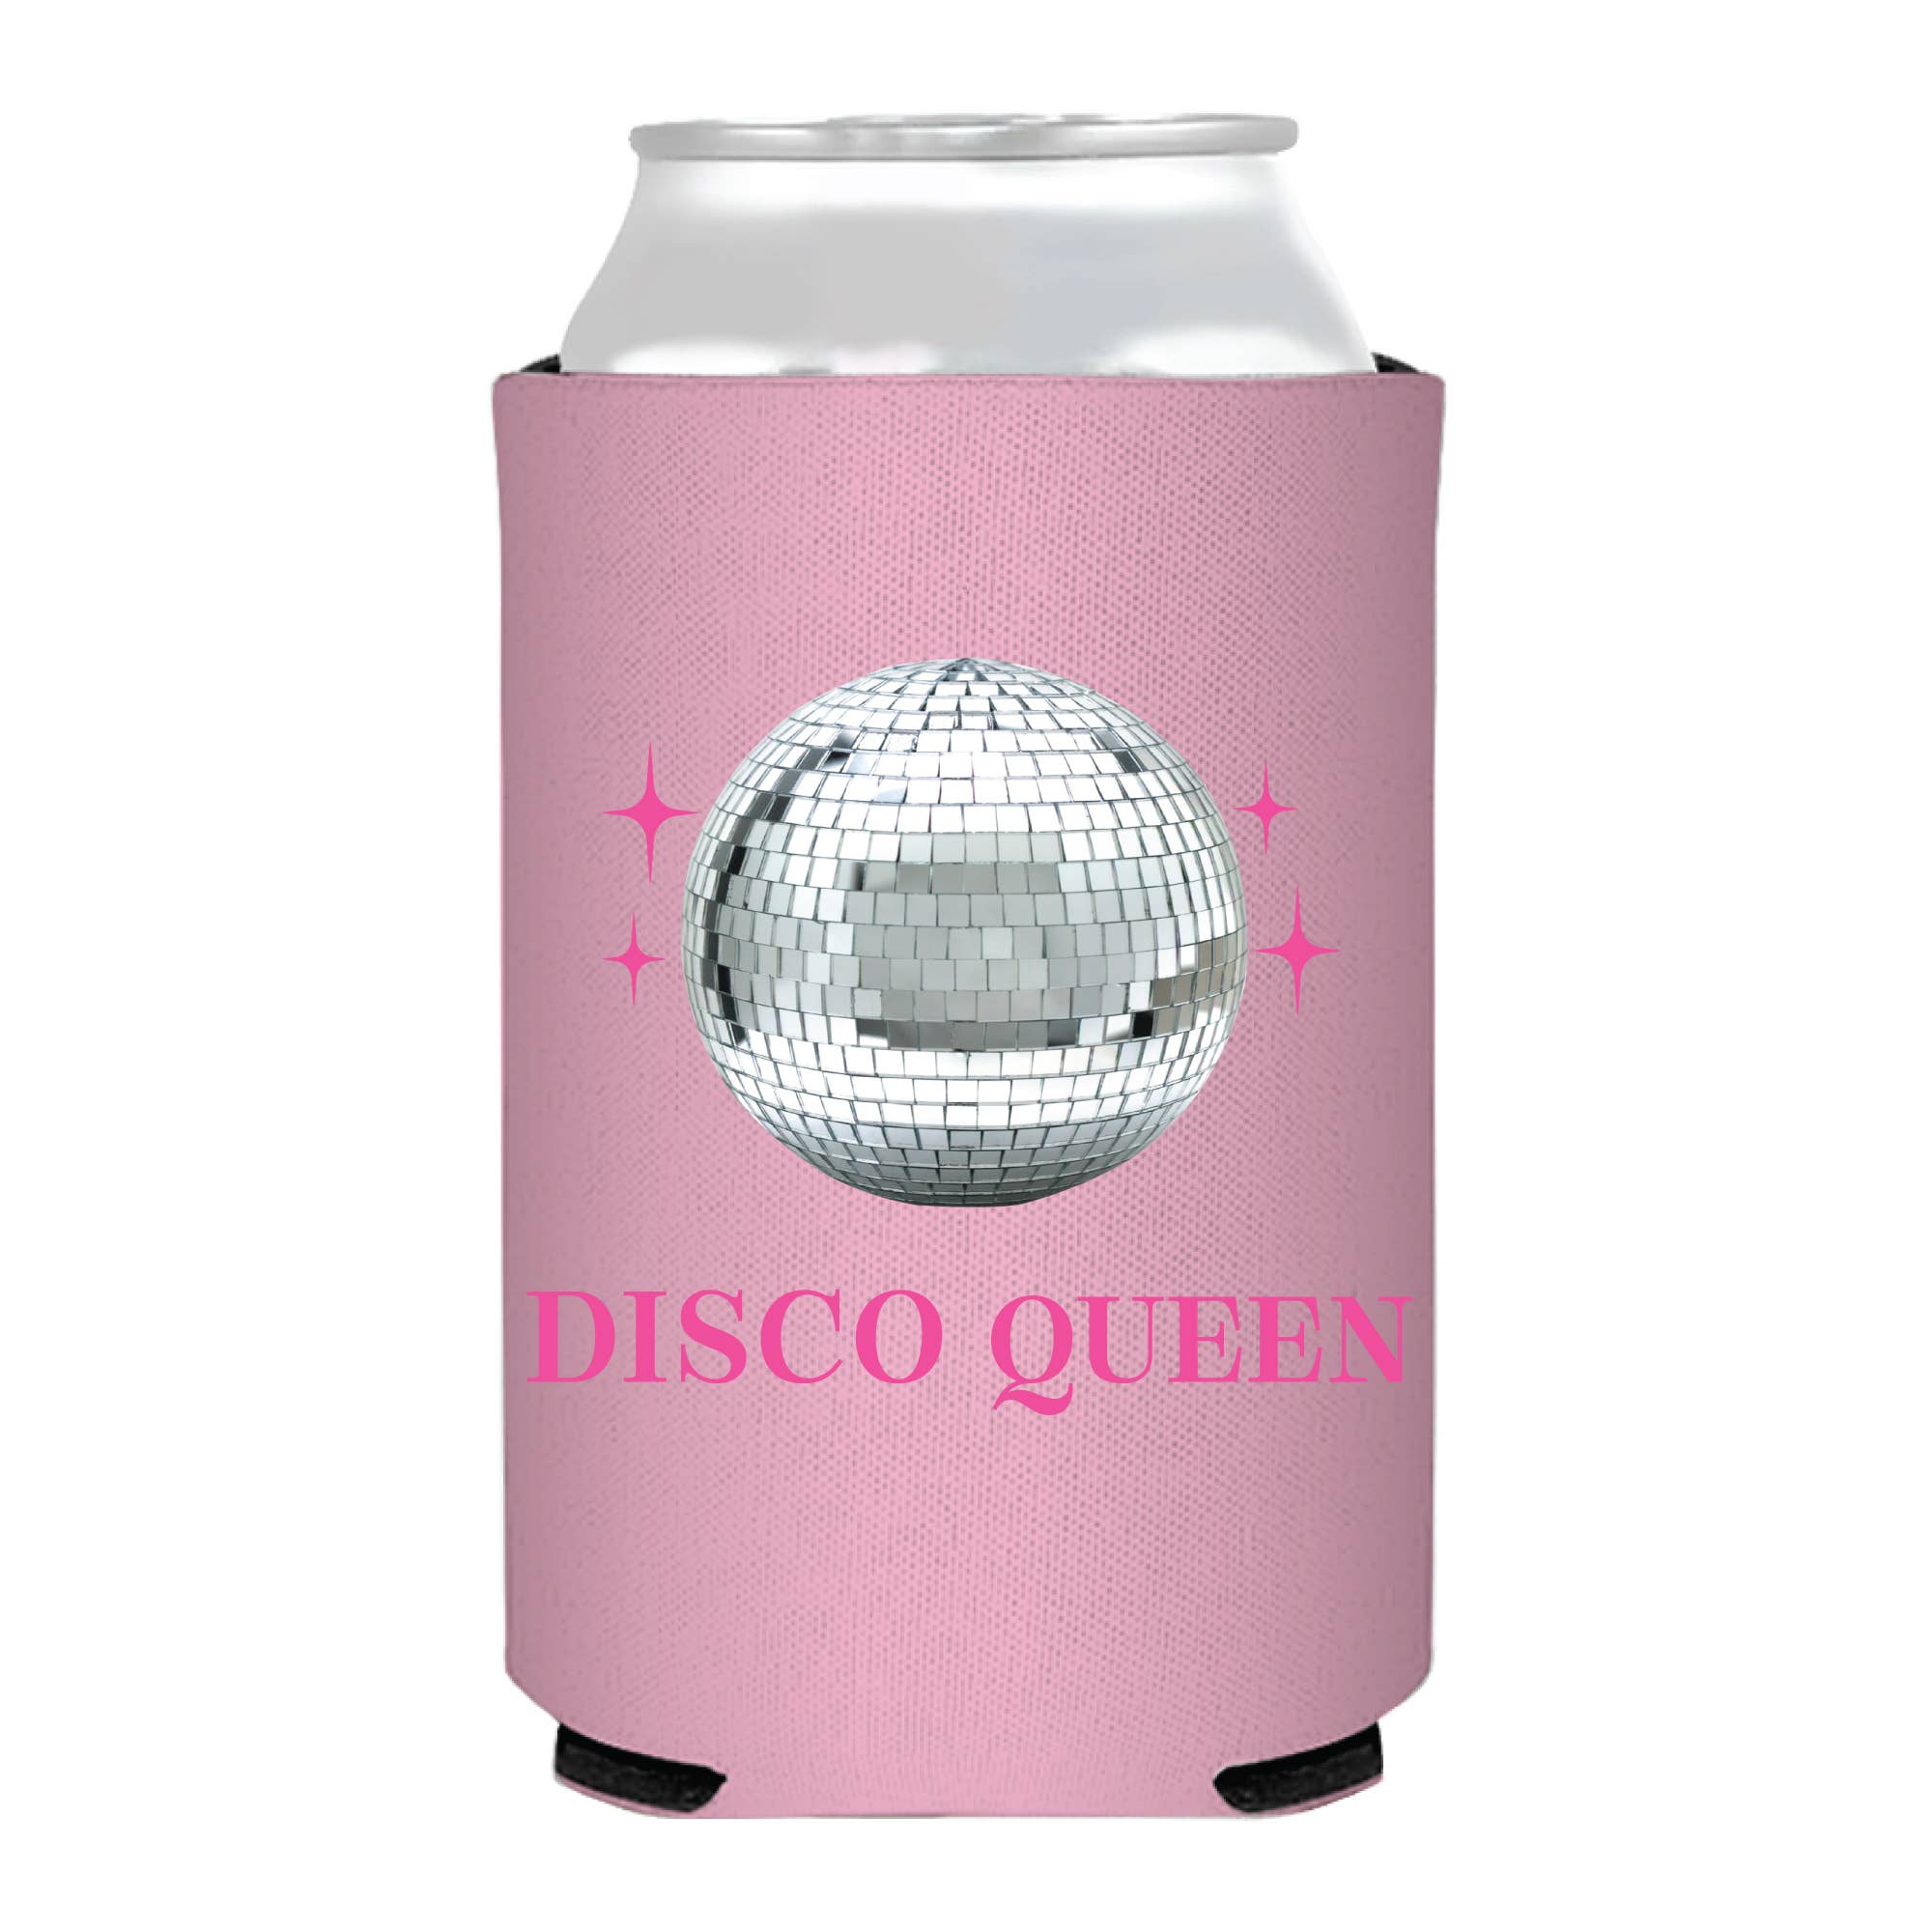 Disco Queen Koozie - Oh My Darling Party Co-bachelorettebachelorette partycan cooler #Fringe_Backdrop#